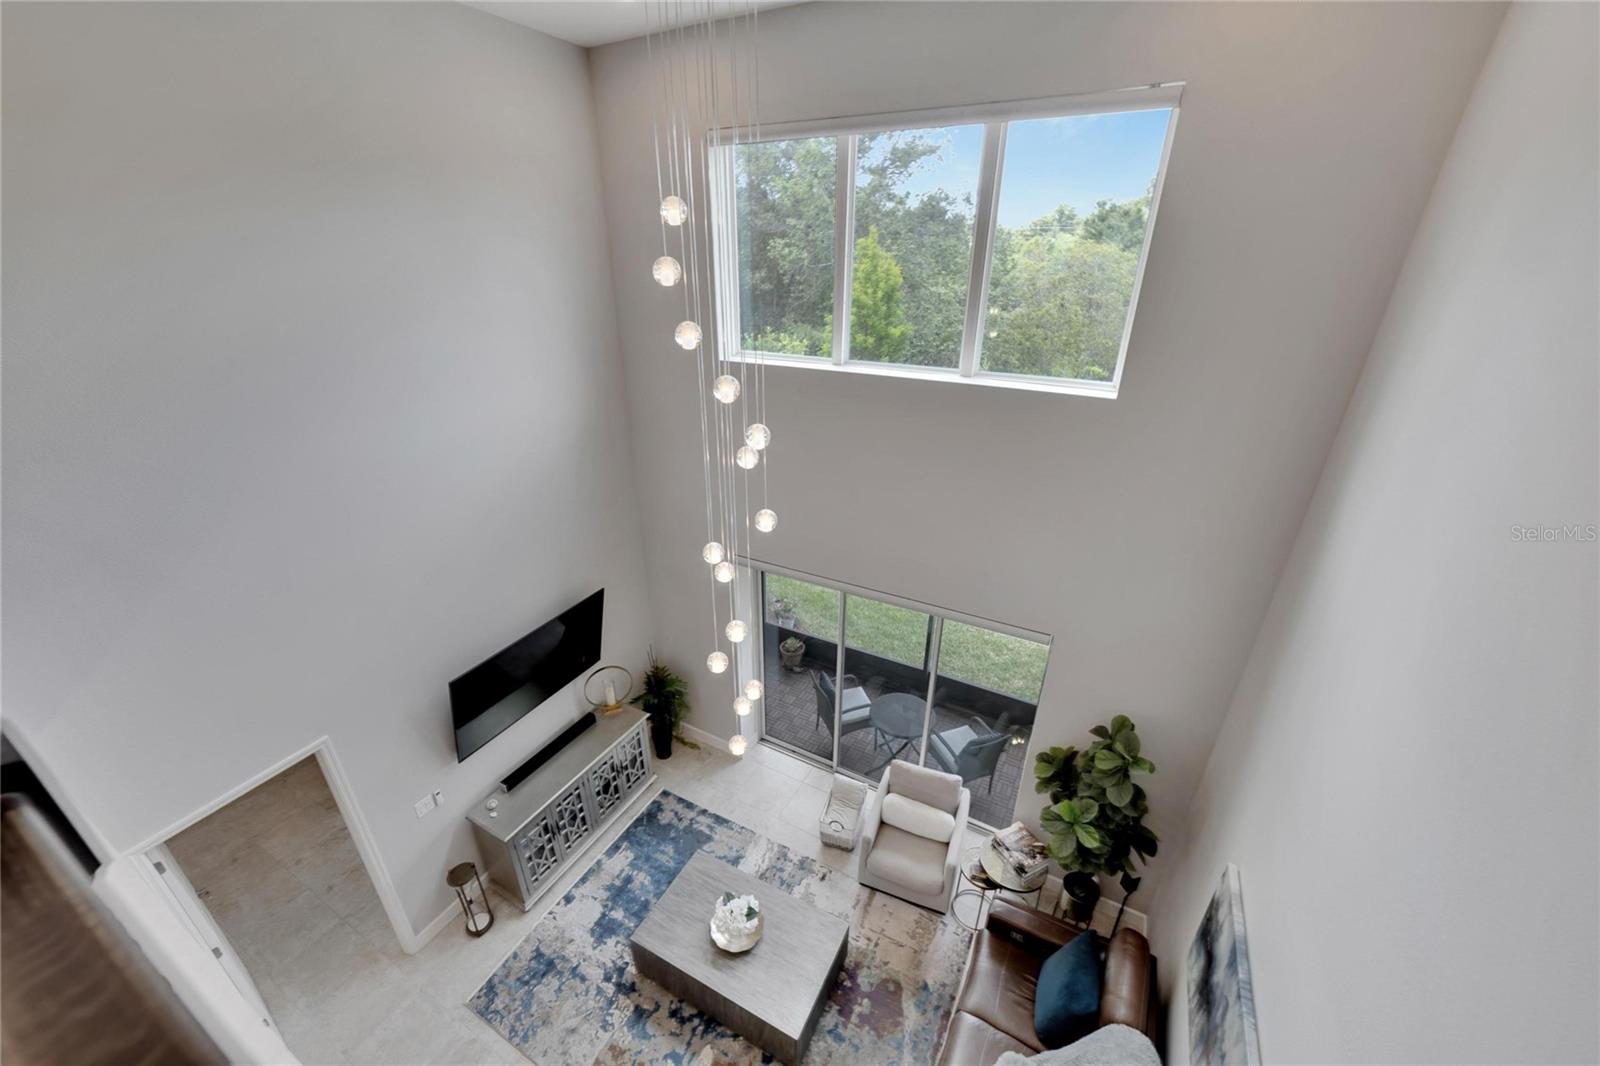 View into living room from loft at 12306 Terracina Chase Ct, Tampa, FL 33625